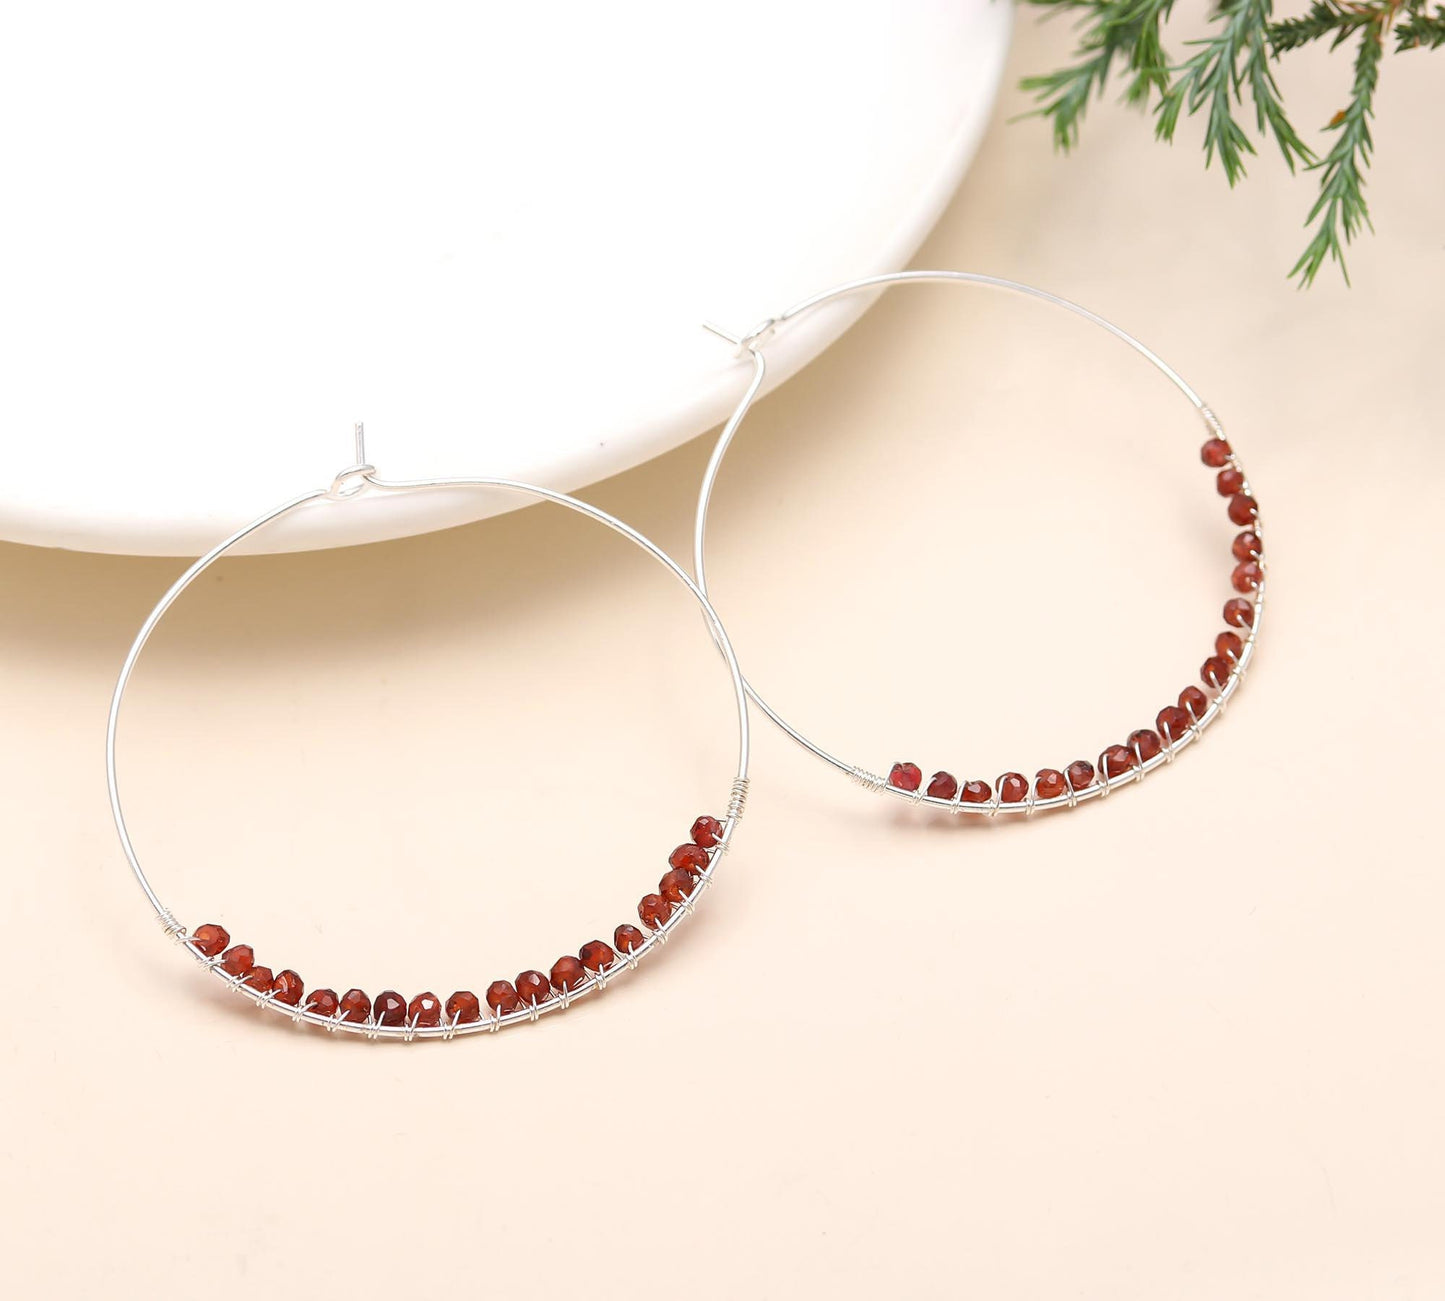 Solid 925 Sterling Silver Big Hoop Earring in Garnet Round Beads, Gift Birthday, Anniversary, Mothers Day, Christmas, Women, Girl